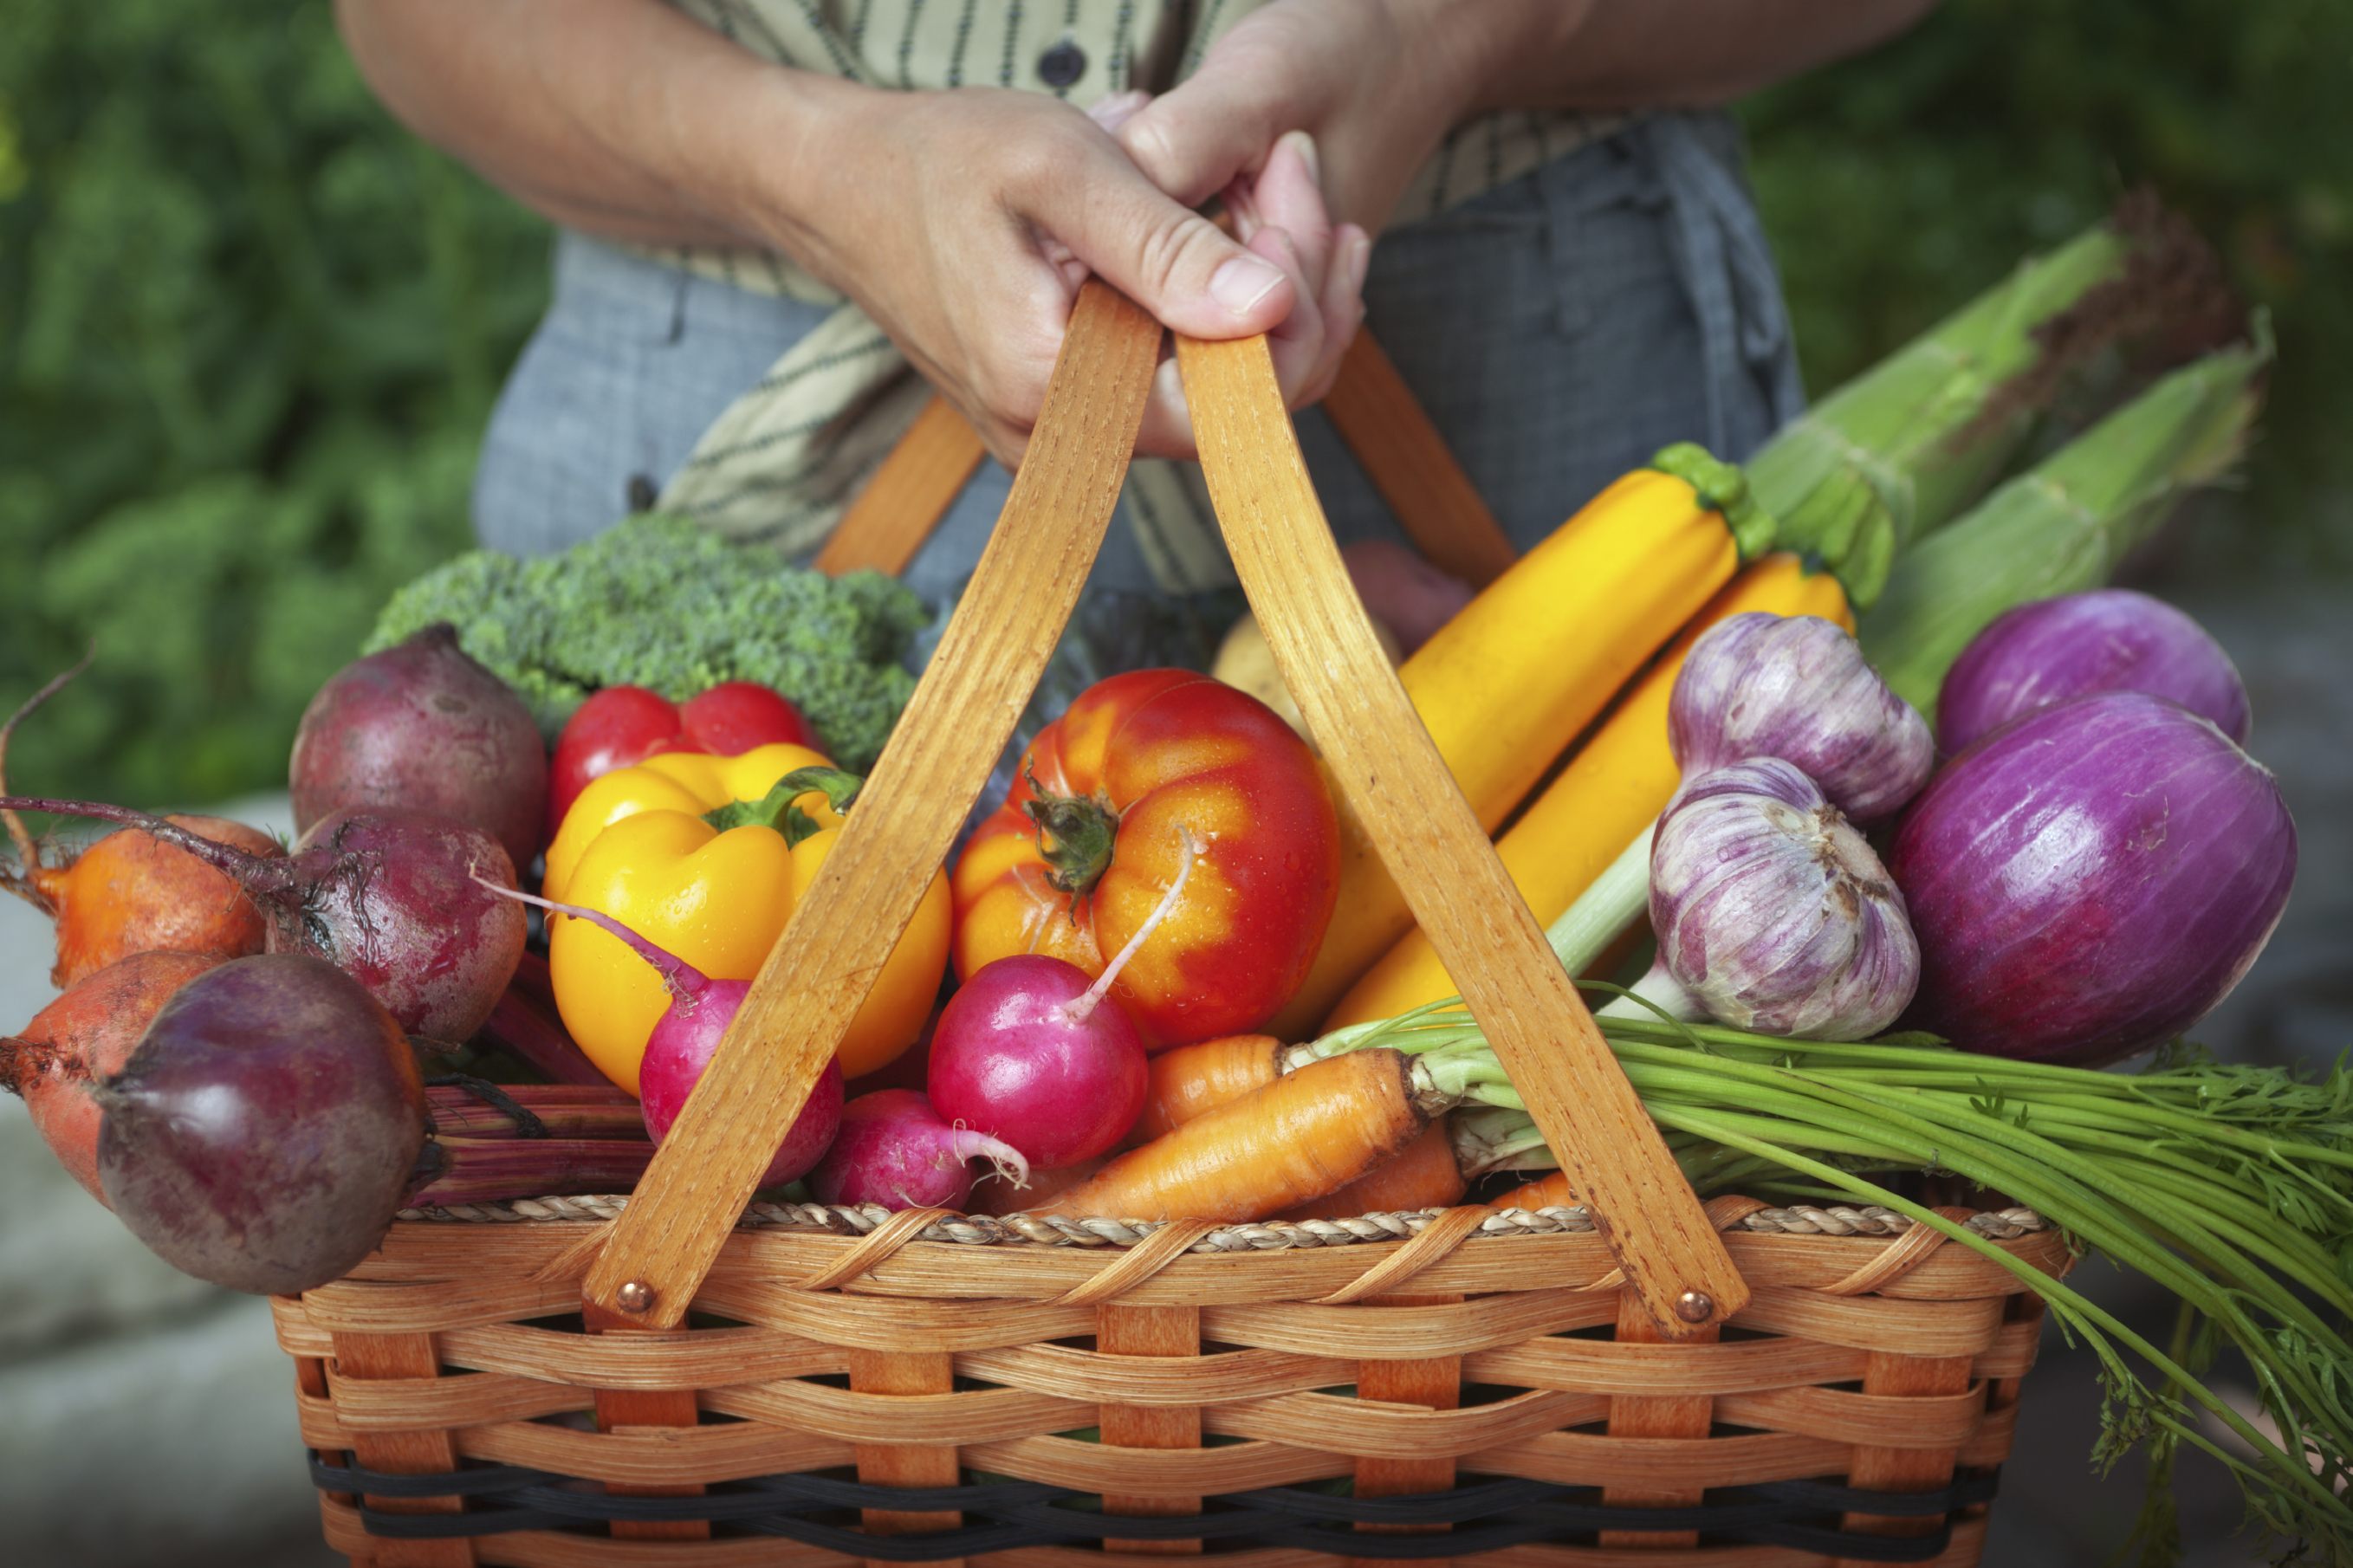 10 Myths About Organic Food Debunked